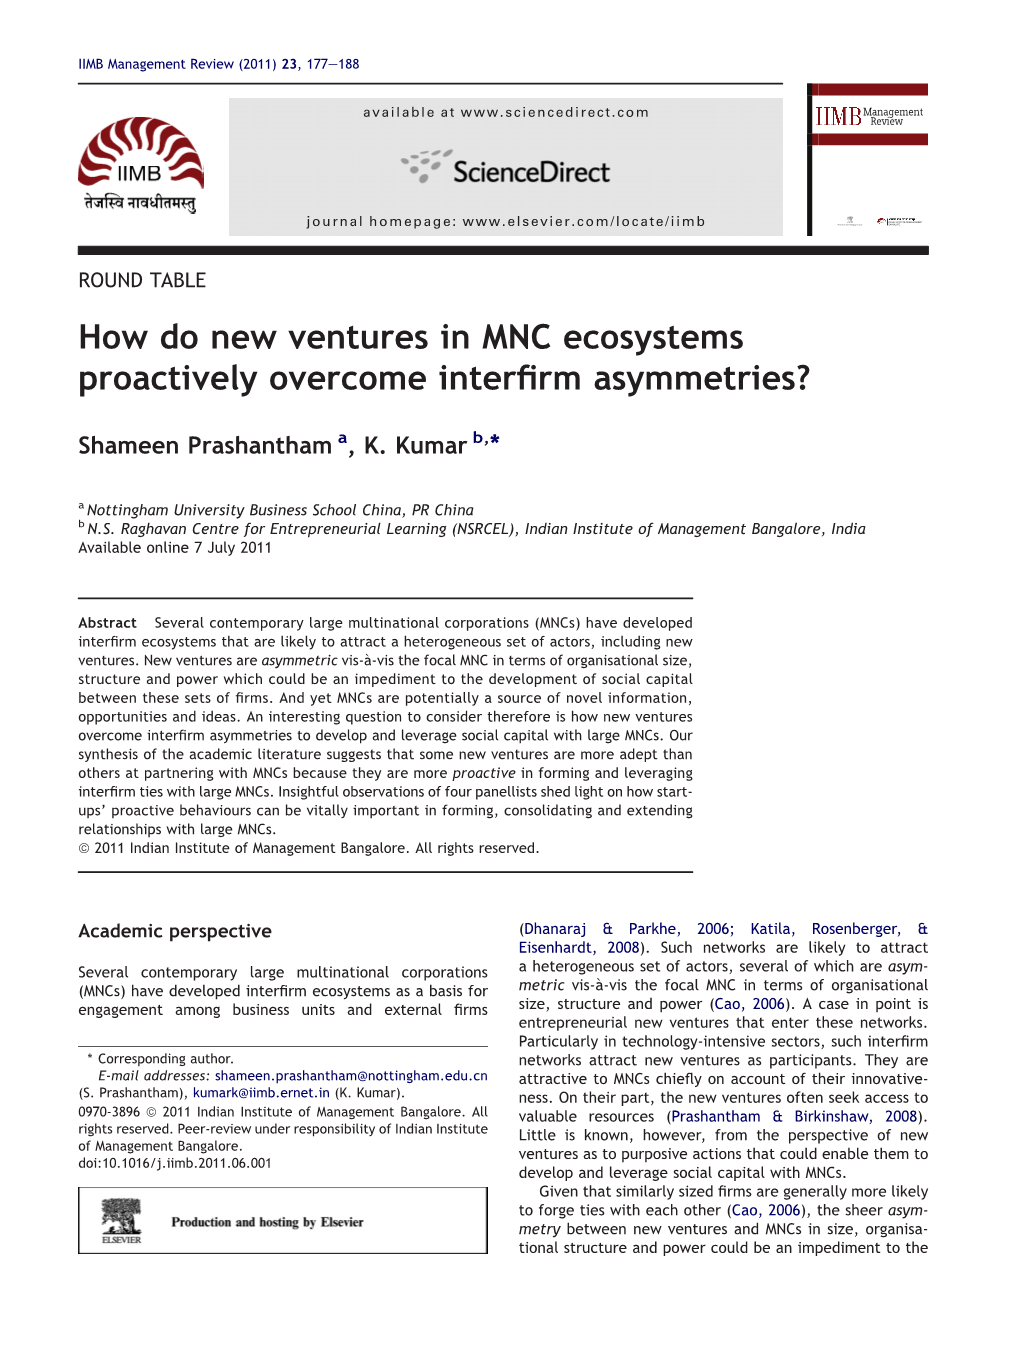 How Do New Ventures in MNC Ecosystems Proactively Overcome Interﬁrm Asymmetries?